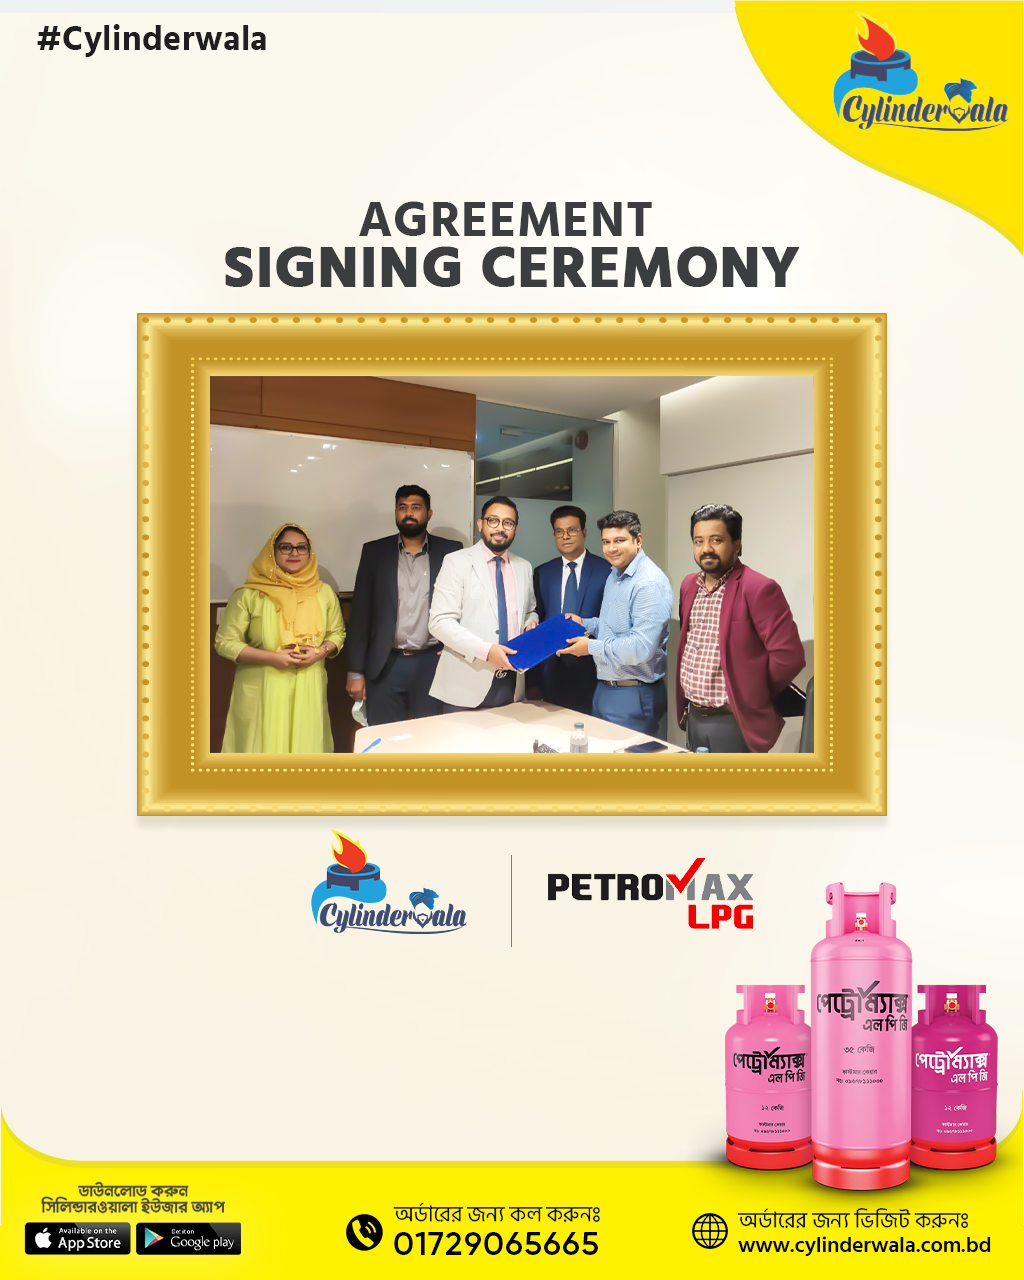 Agreement ceremony company cylinders facebook post cylinderwala LPG cylinder LPG Gas online cylinder petromax lpg gas signing